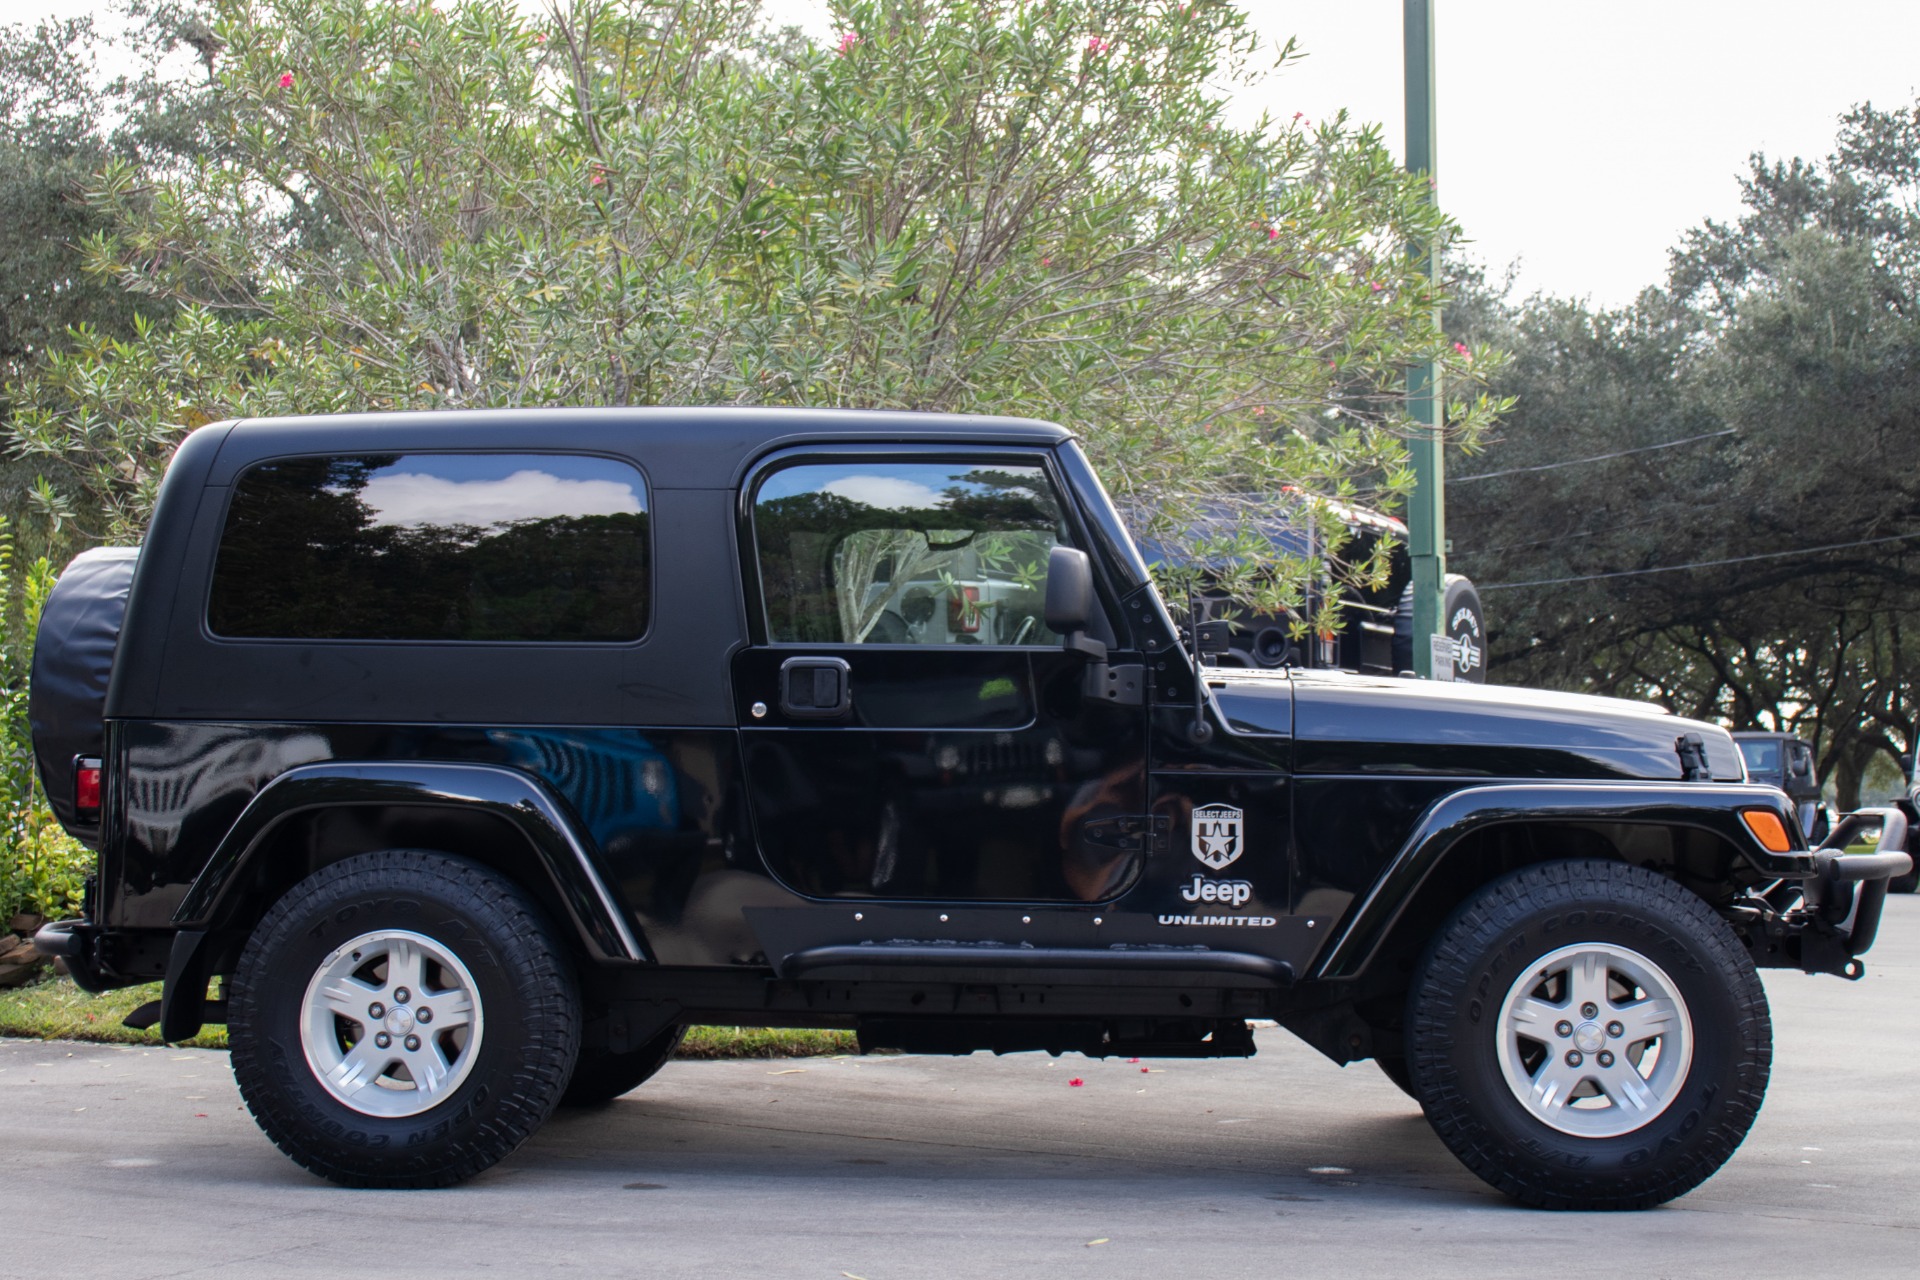 Used 2006 Jeep Wrangler Unlimited For Sale ($25,995) | Select Jeeps Inc.  Stock #717835